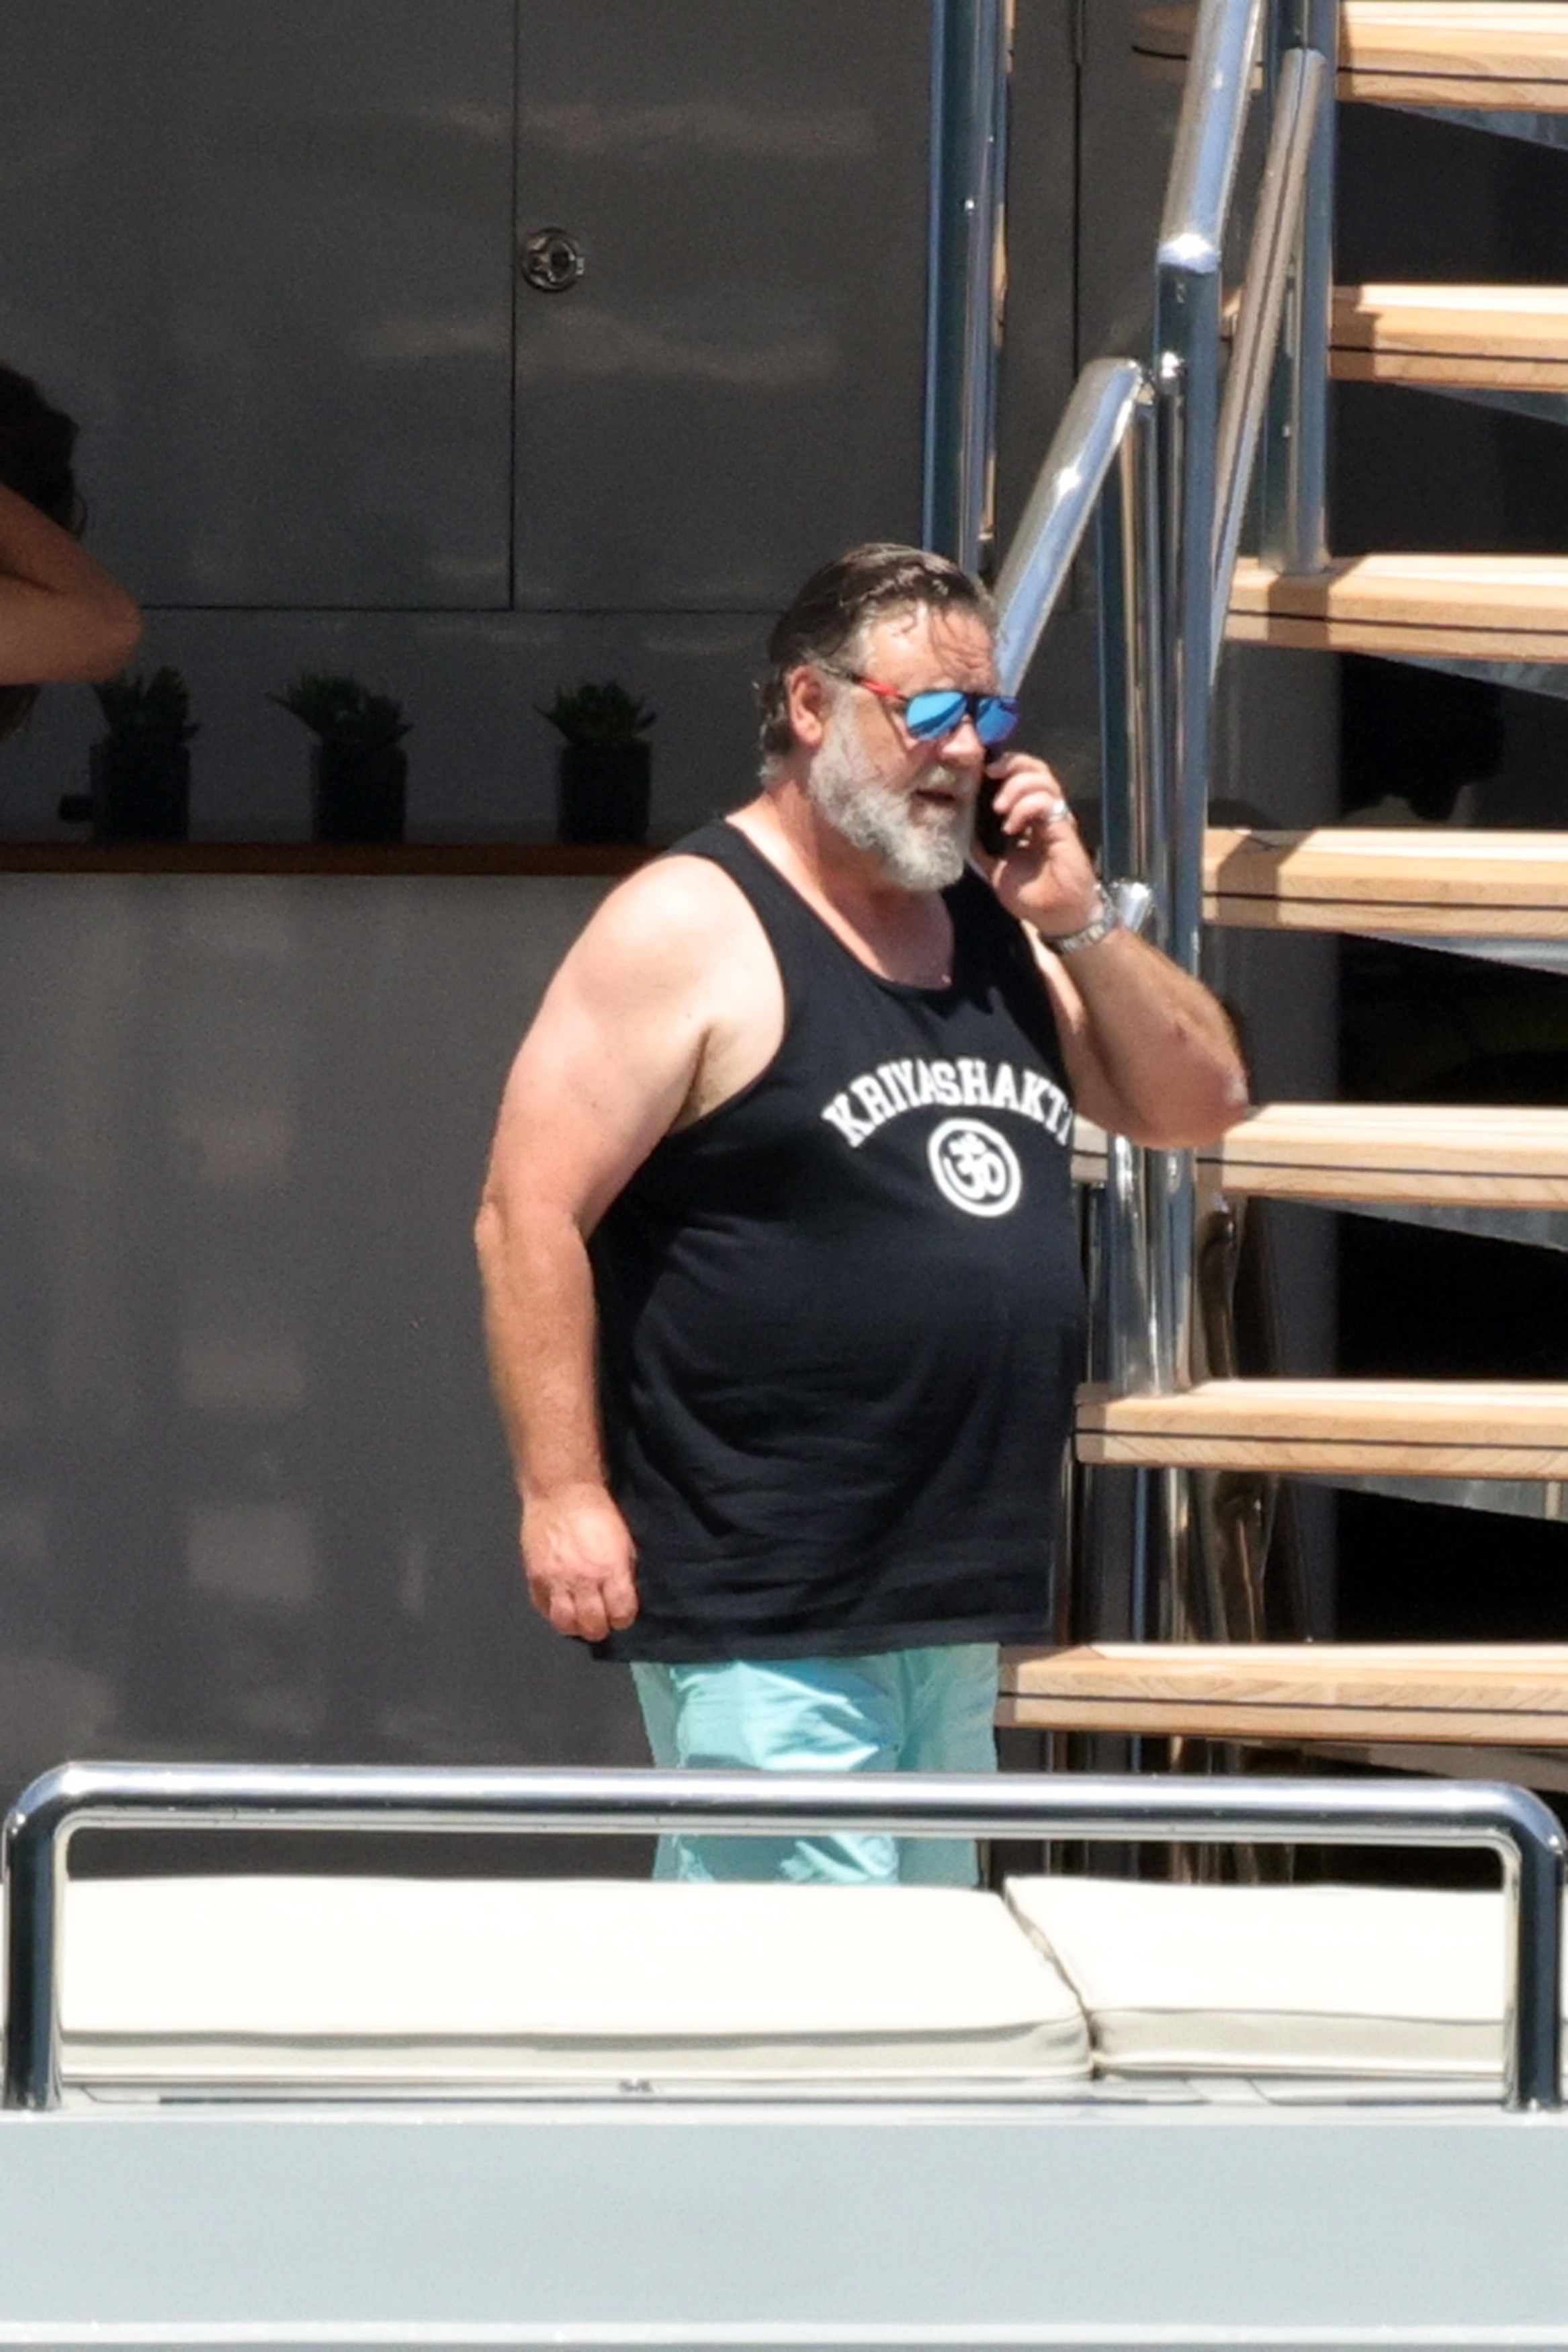 <p>Russell Crowe took a phone call while vacationing on a yacht with his sons and girlfriend Britney Theriot (not pictured) off the coast of the Italian island of Capri on July 10.</p>